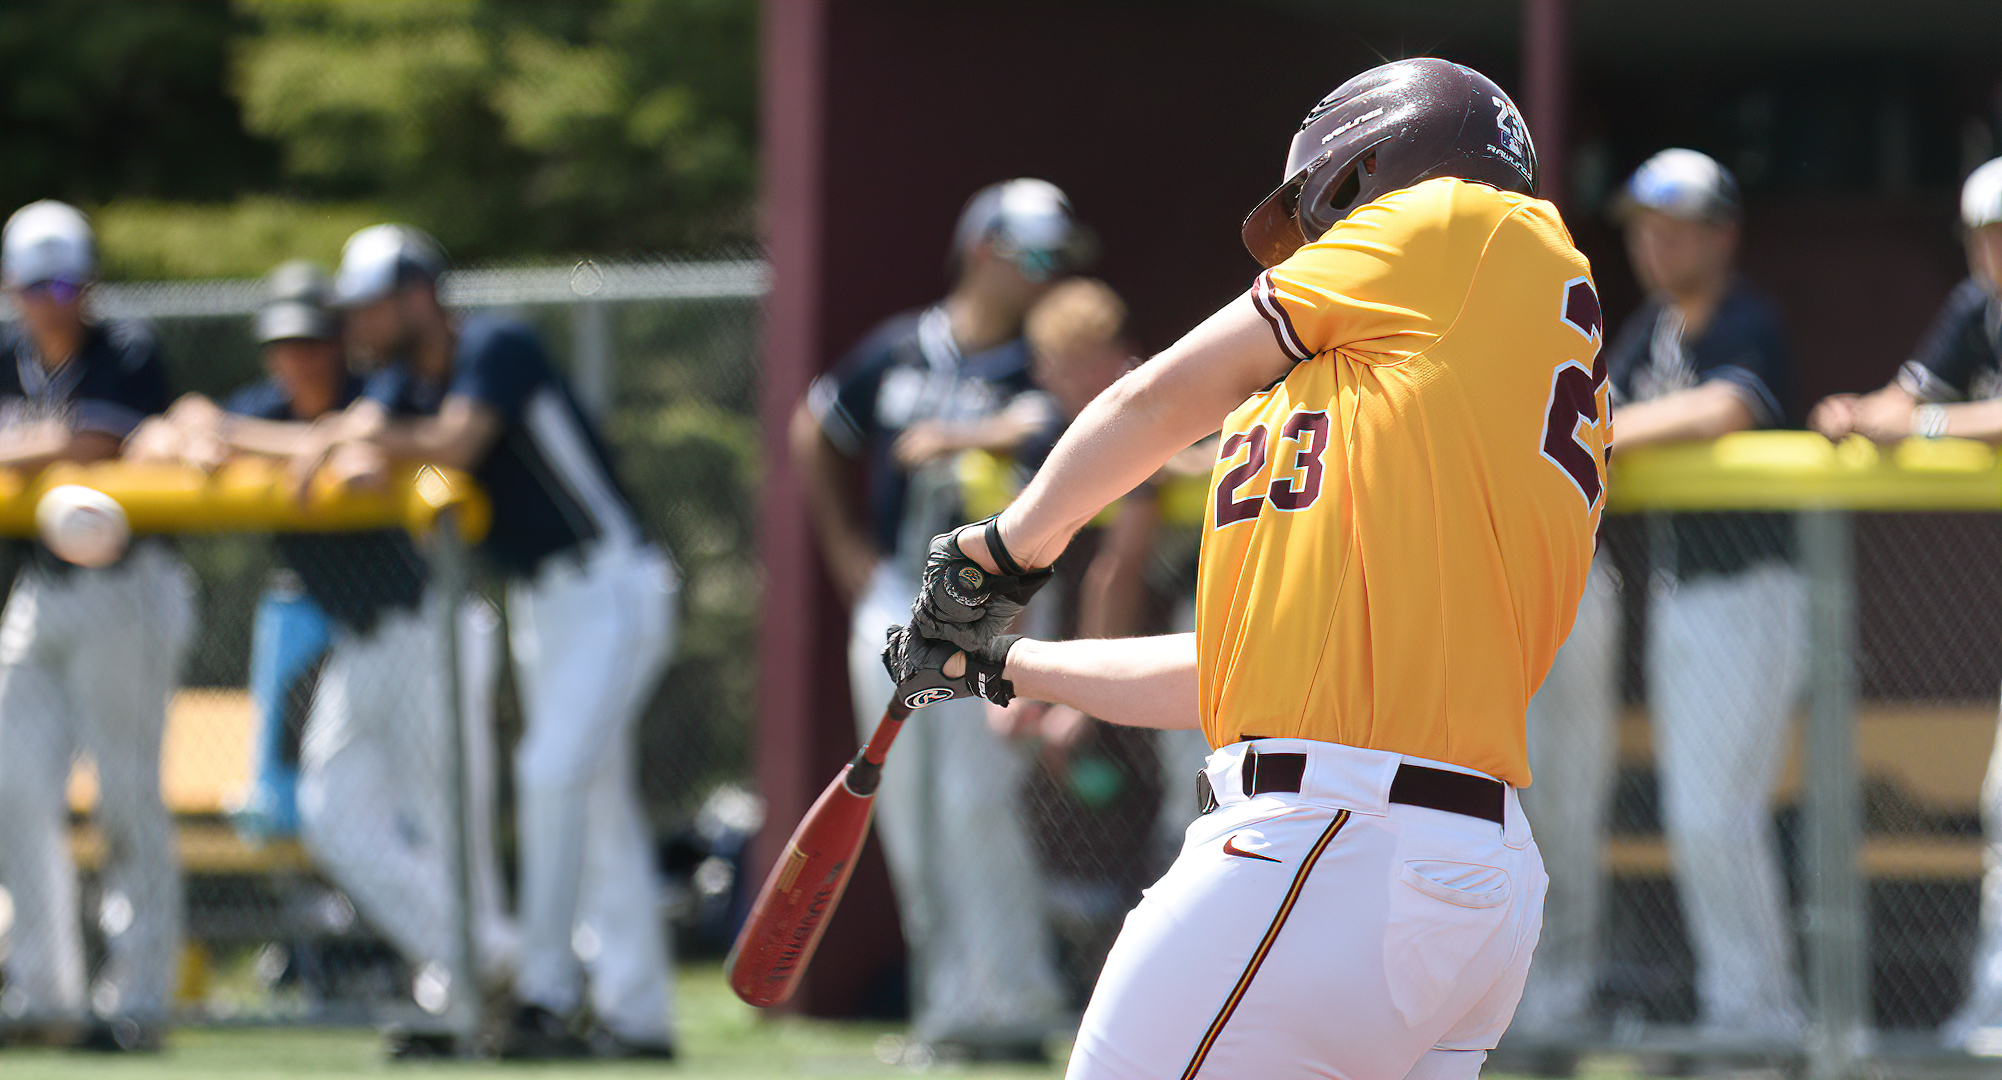 Senior Ben Swanson connects on a double in the first inning of the Cobbers' opener with Bethel.